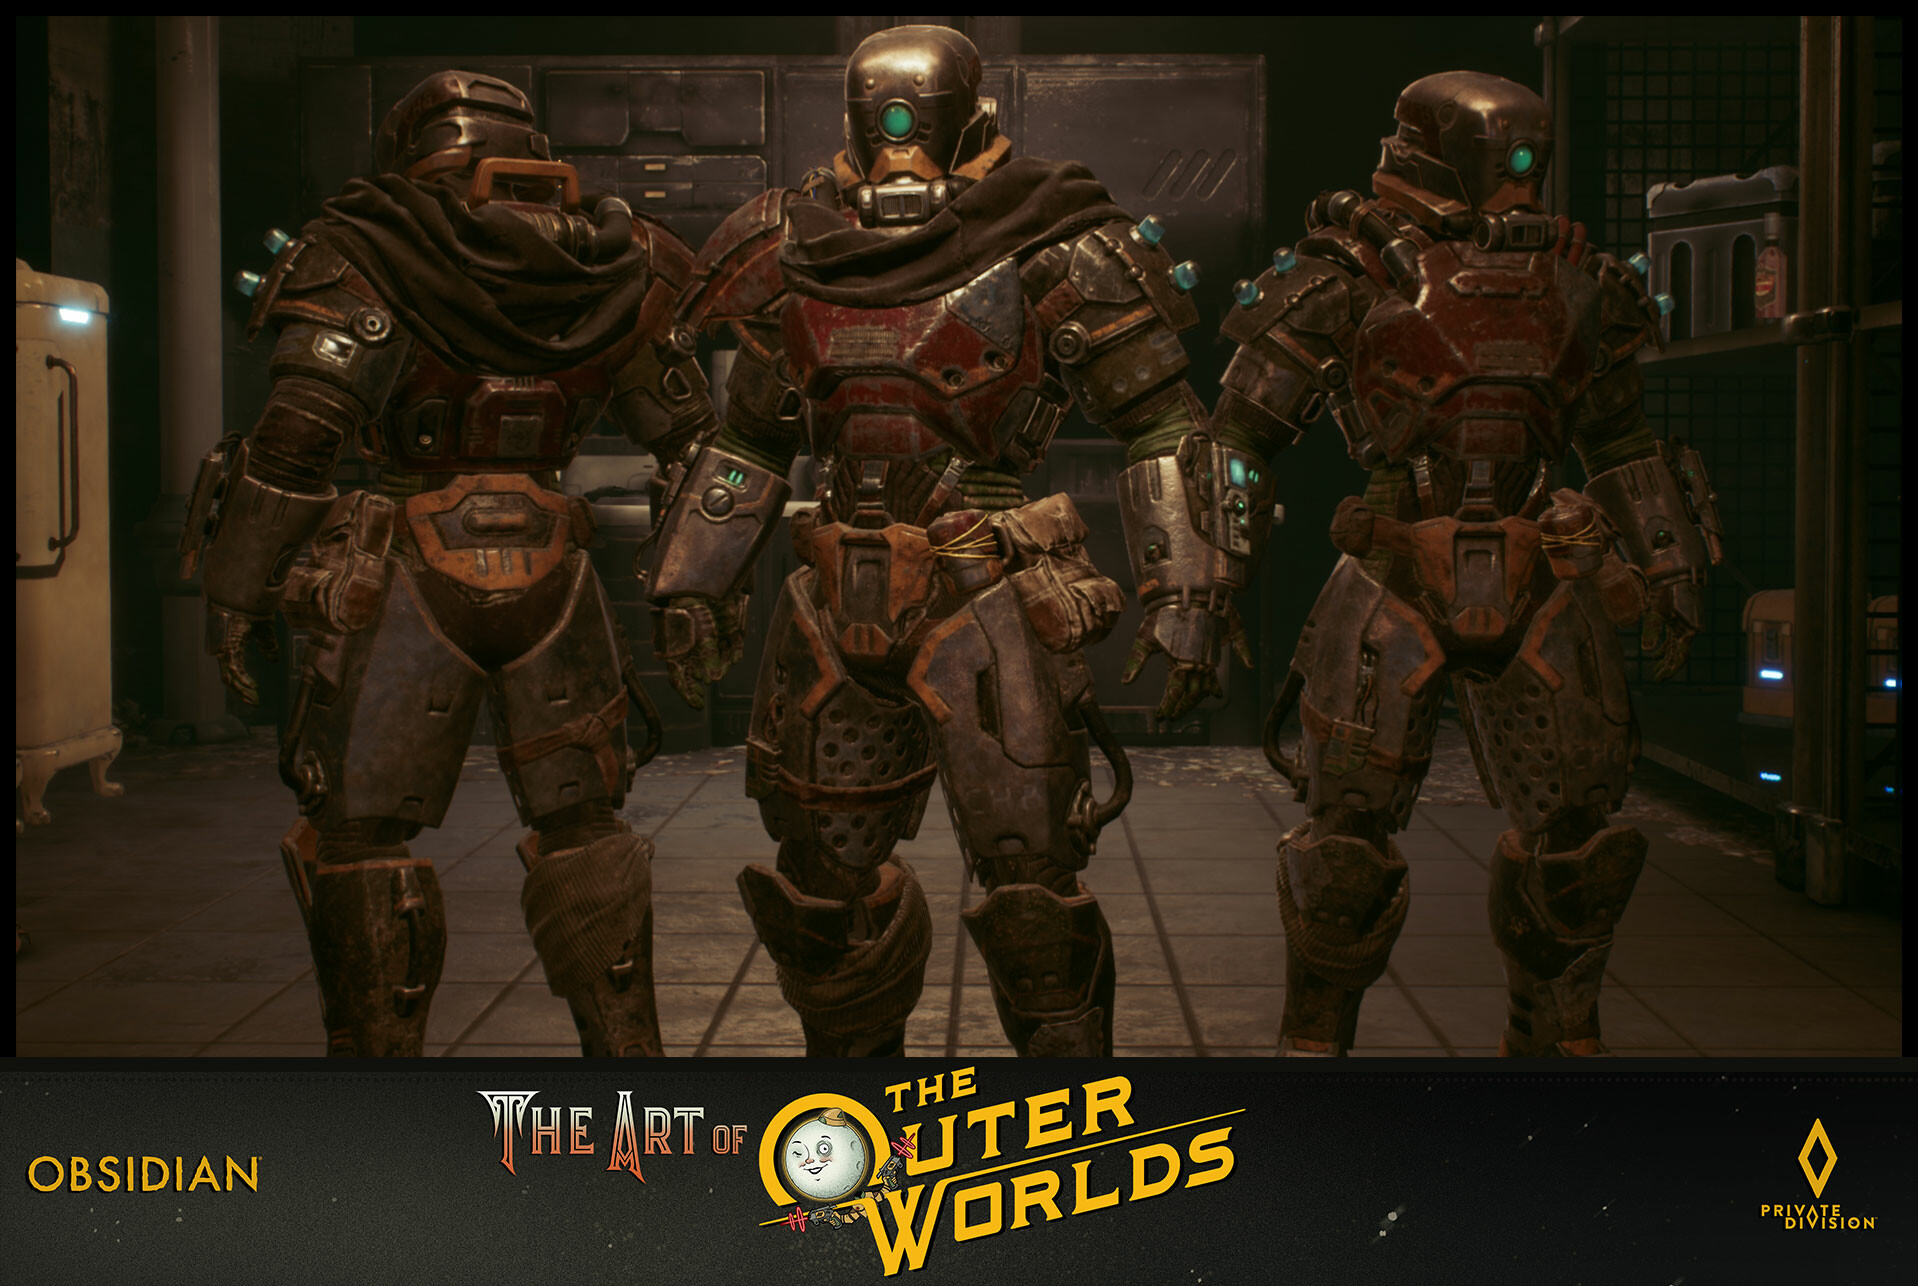 Marauder Plunderer, The Outer Worlds Wiki